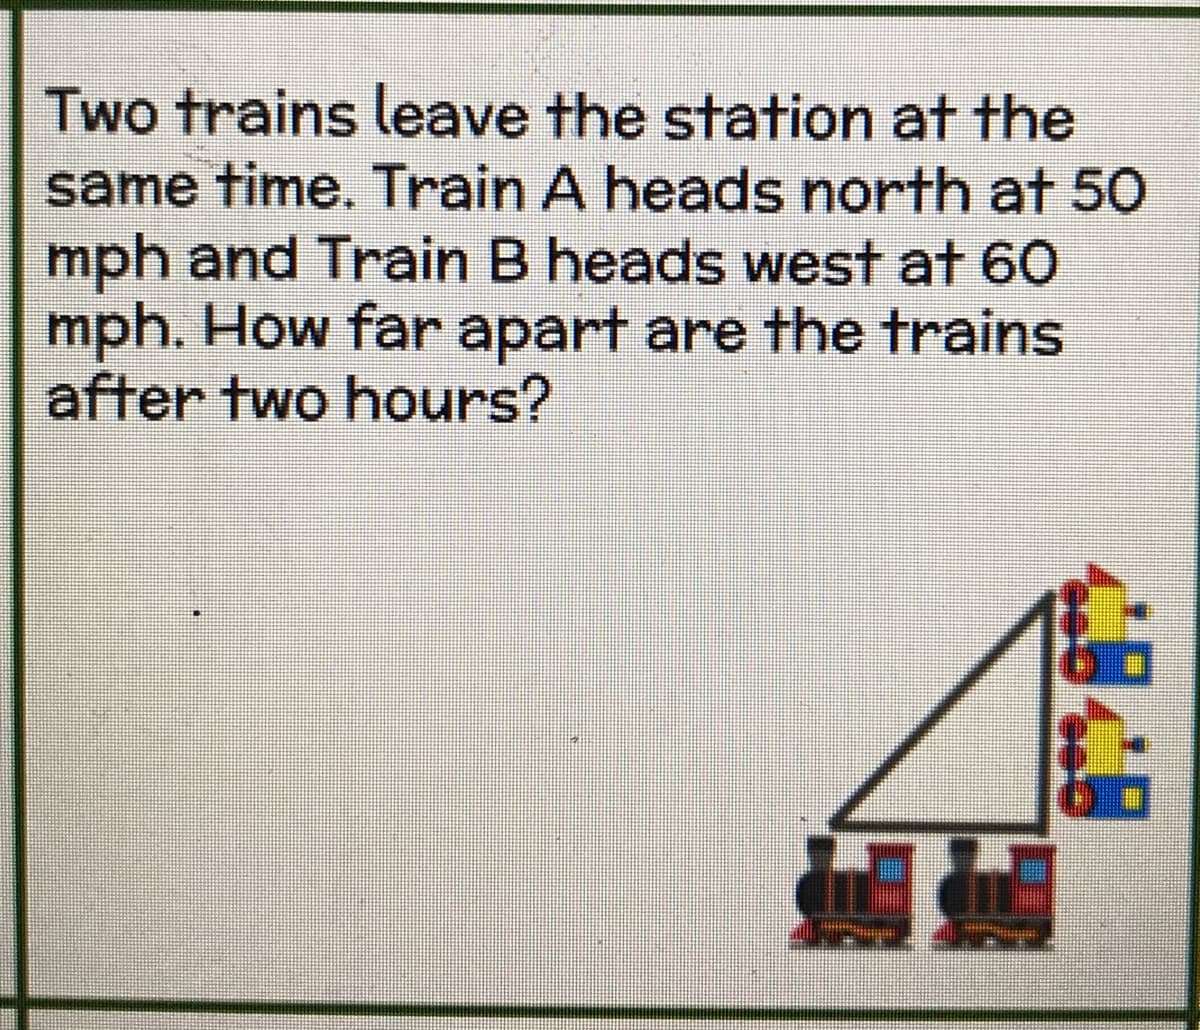 Two trains leave the station at the
same time. Train A heads north at 50
mph and Train B heads west at 60
mph. How far apart are the trains
after two hours?
